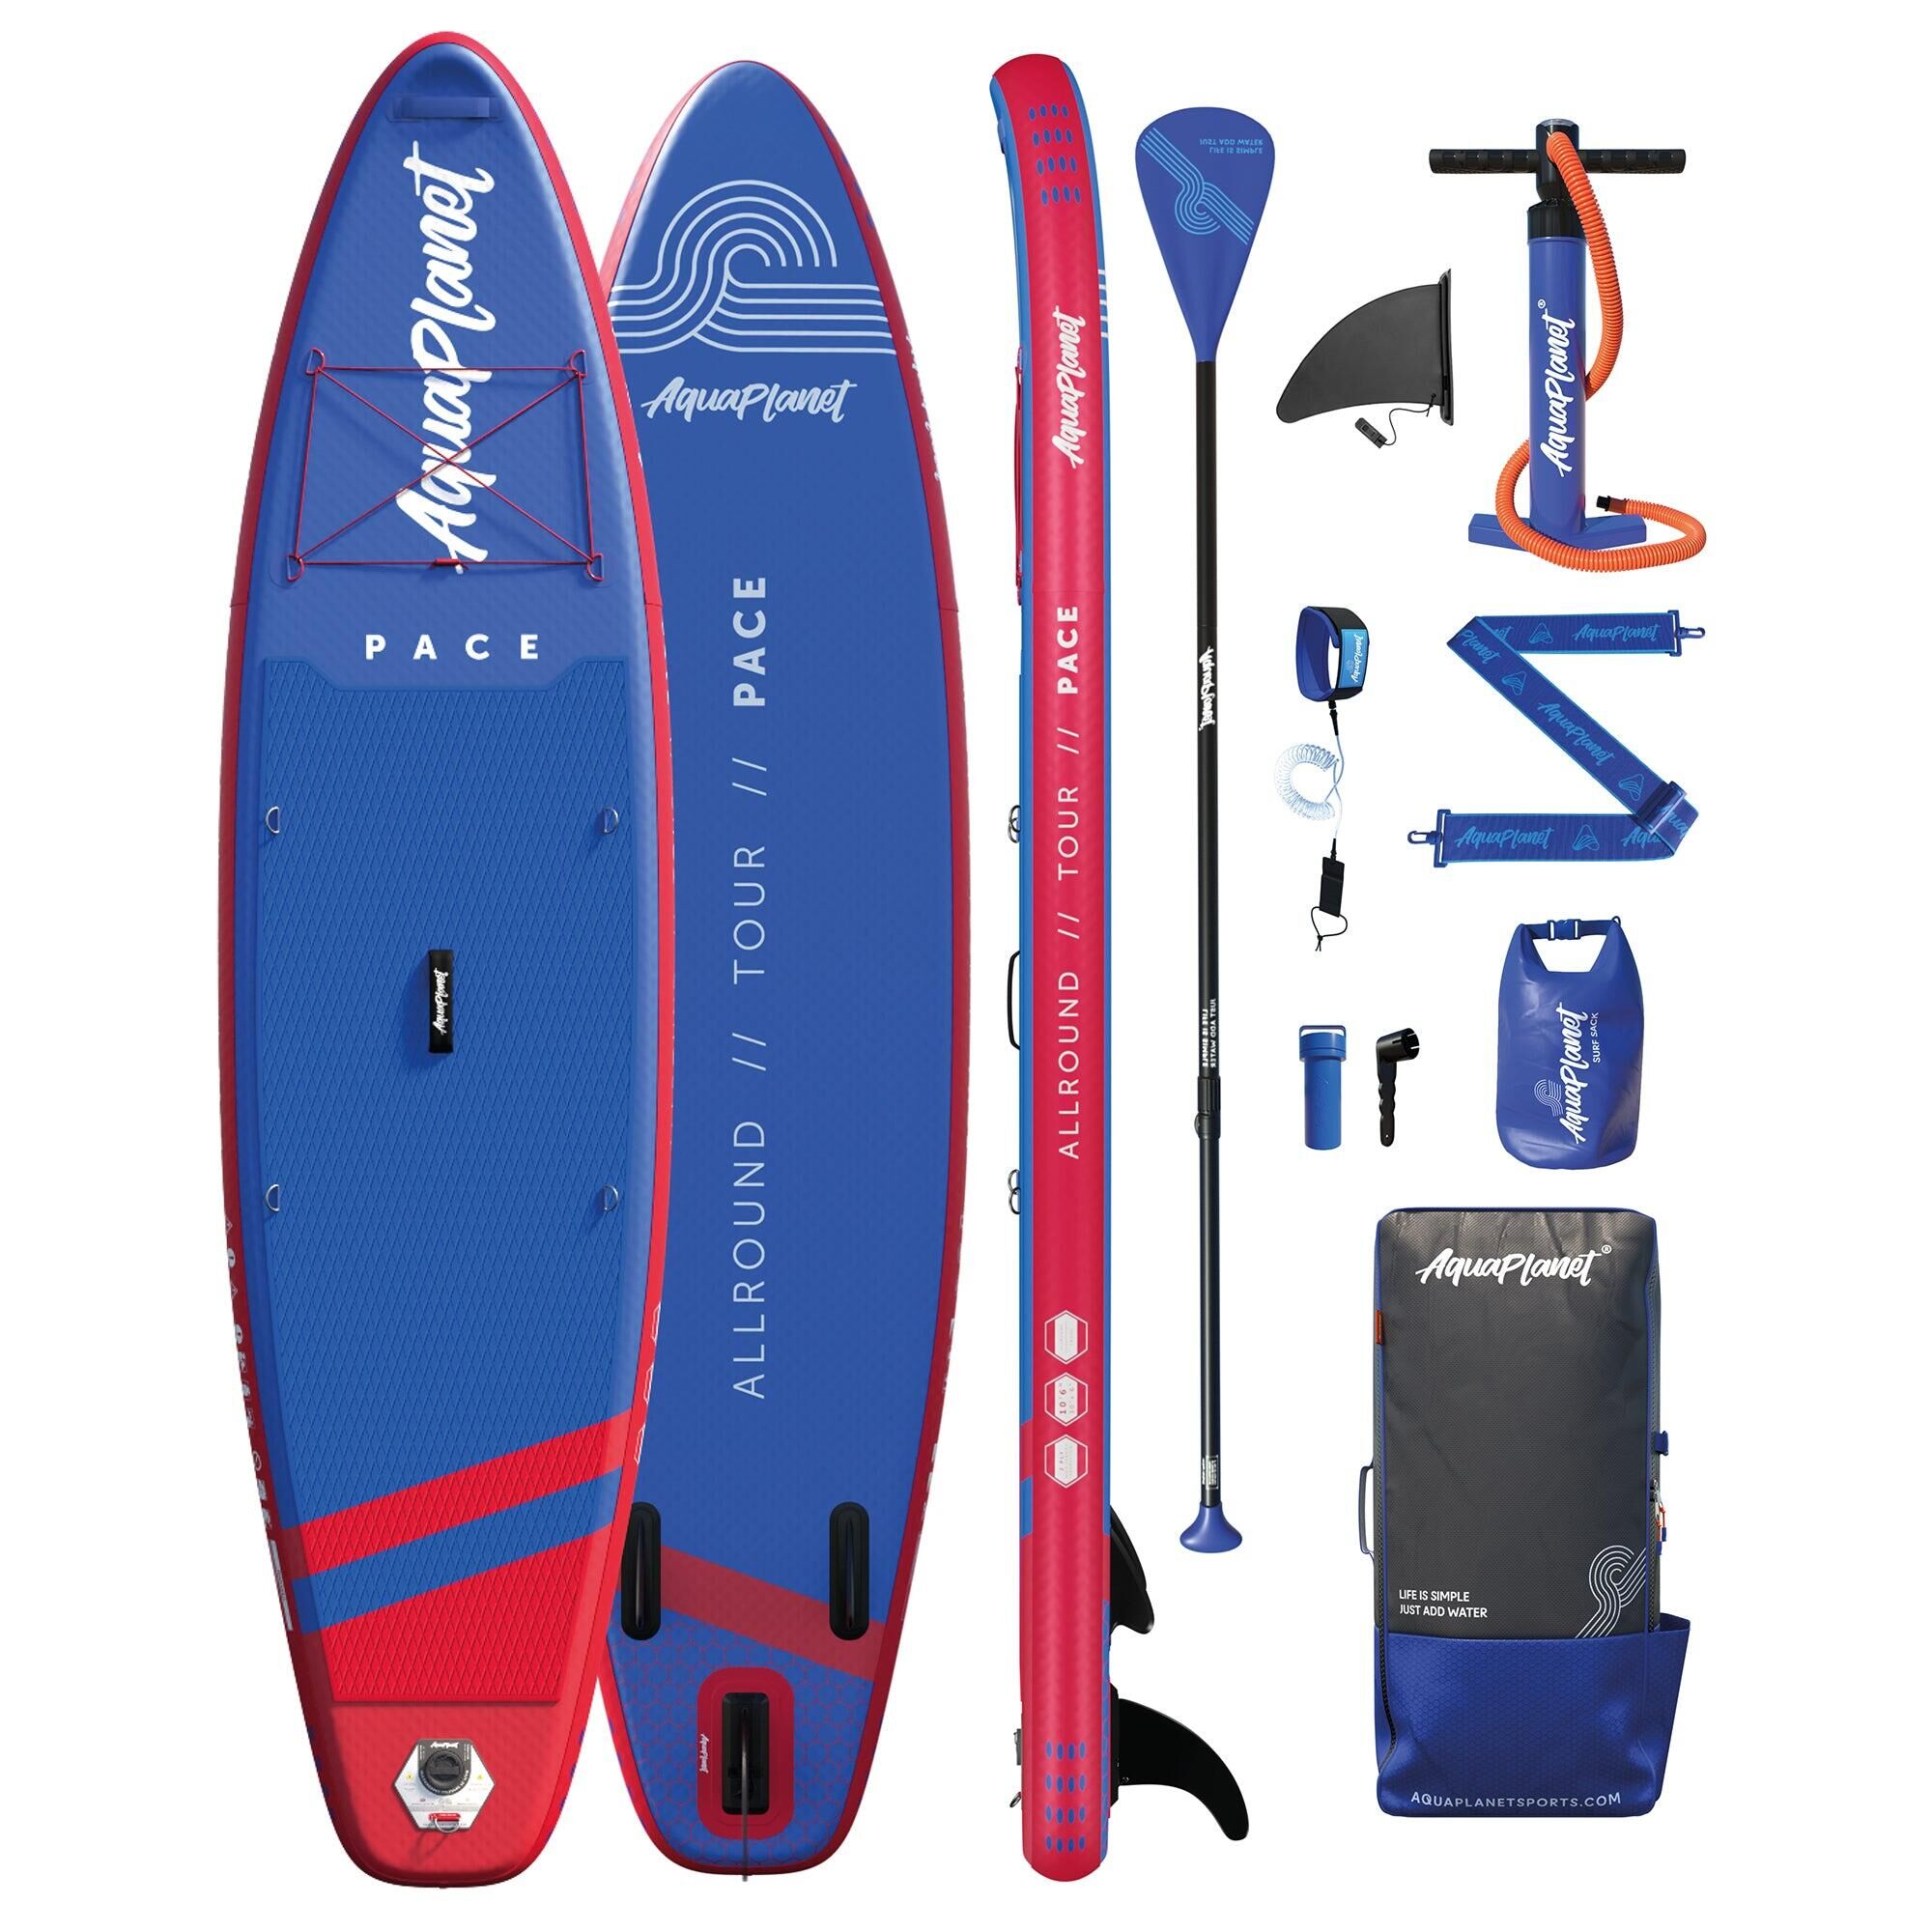 AQUAPLANET Aquaplanet PACE 10'6 Inflatable Stand Up Paddle Board Package - Red/Blue